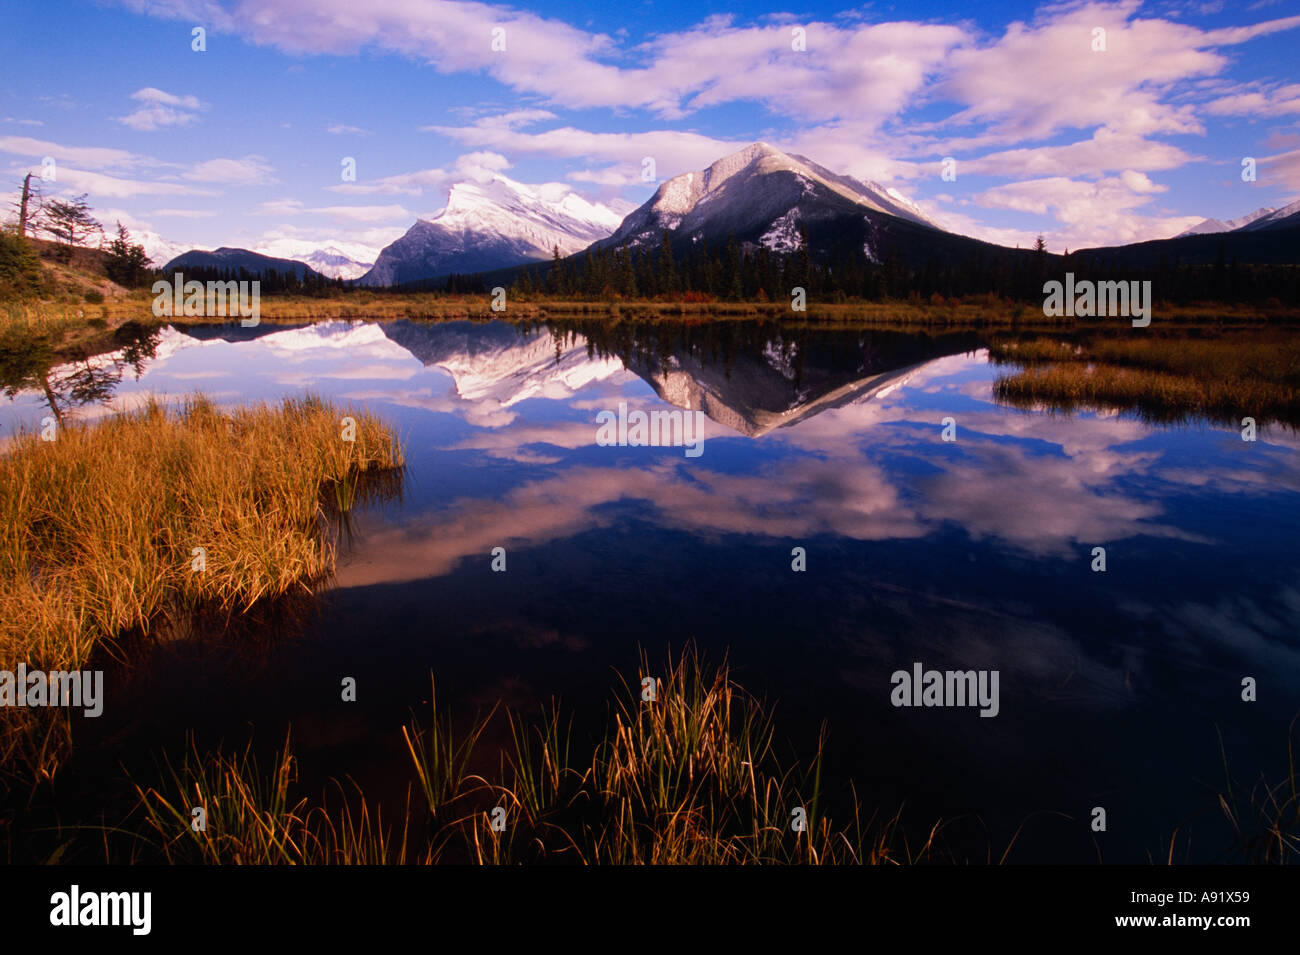 Mt. Rundle from Vermillion Lakes, Banff National Park, Alberta, Canada Stock Photo